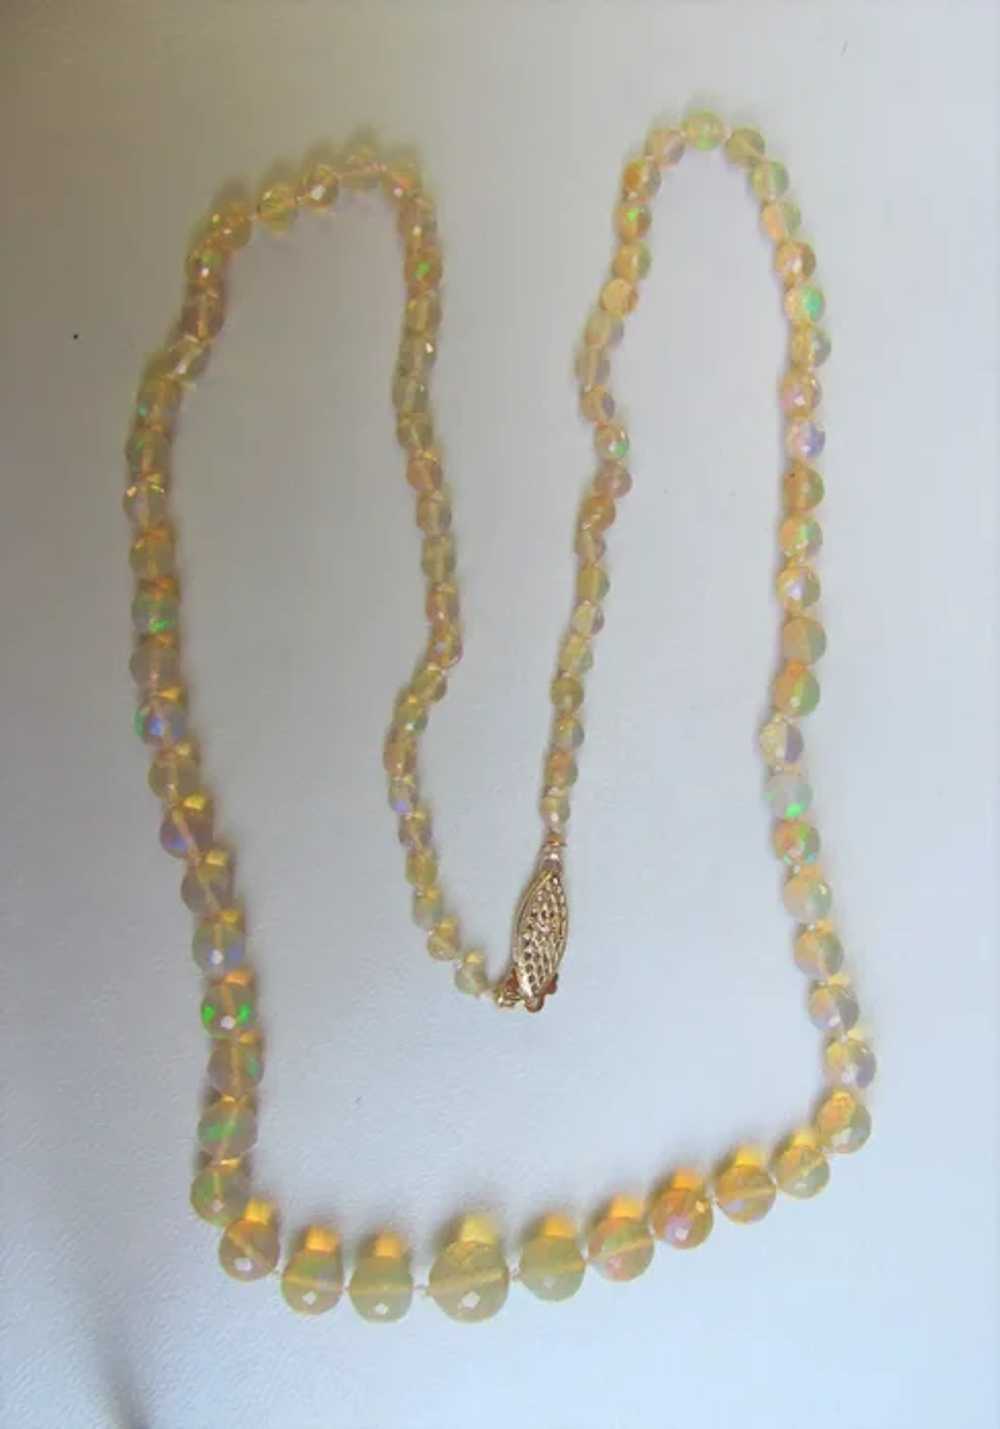 Graduated Strand Opal Bead Necklace 14K Clasp 21" - image 7